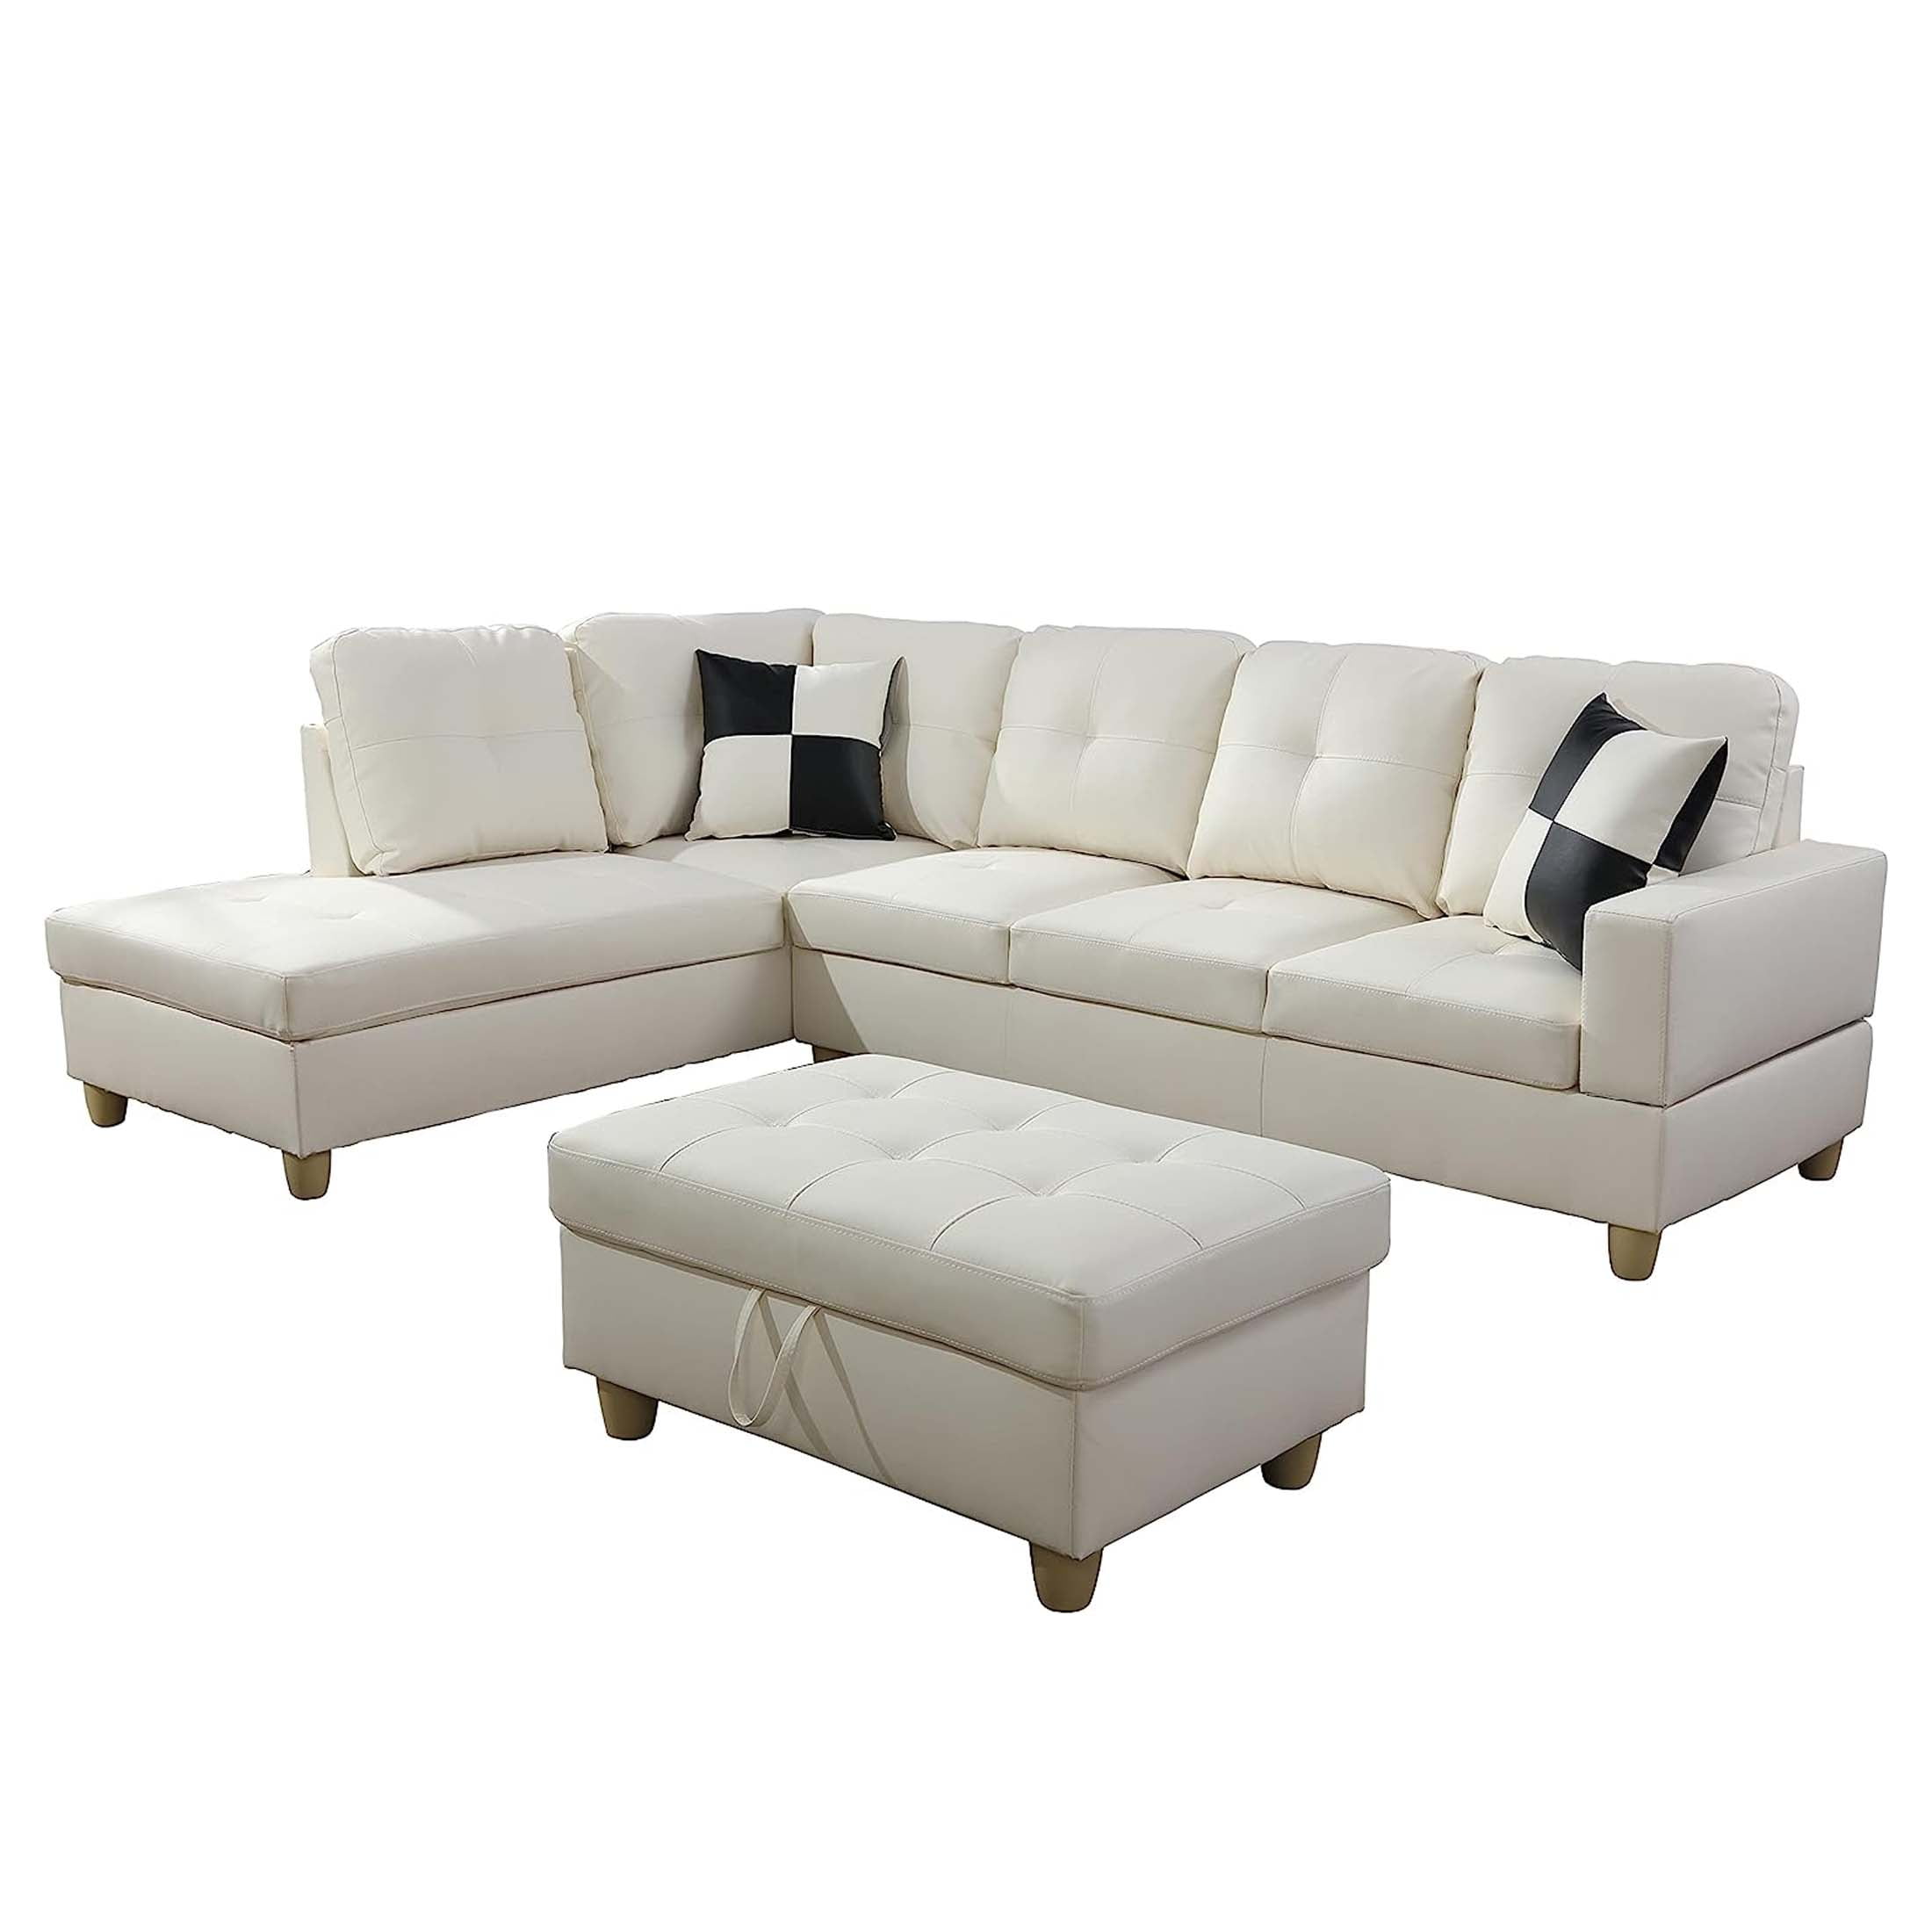 Momspeace Living Room Sectional Couch